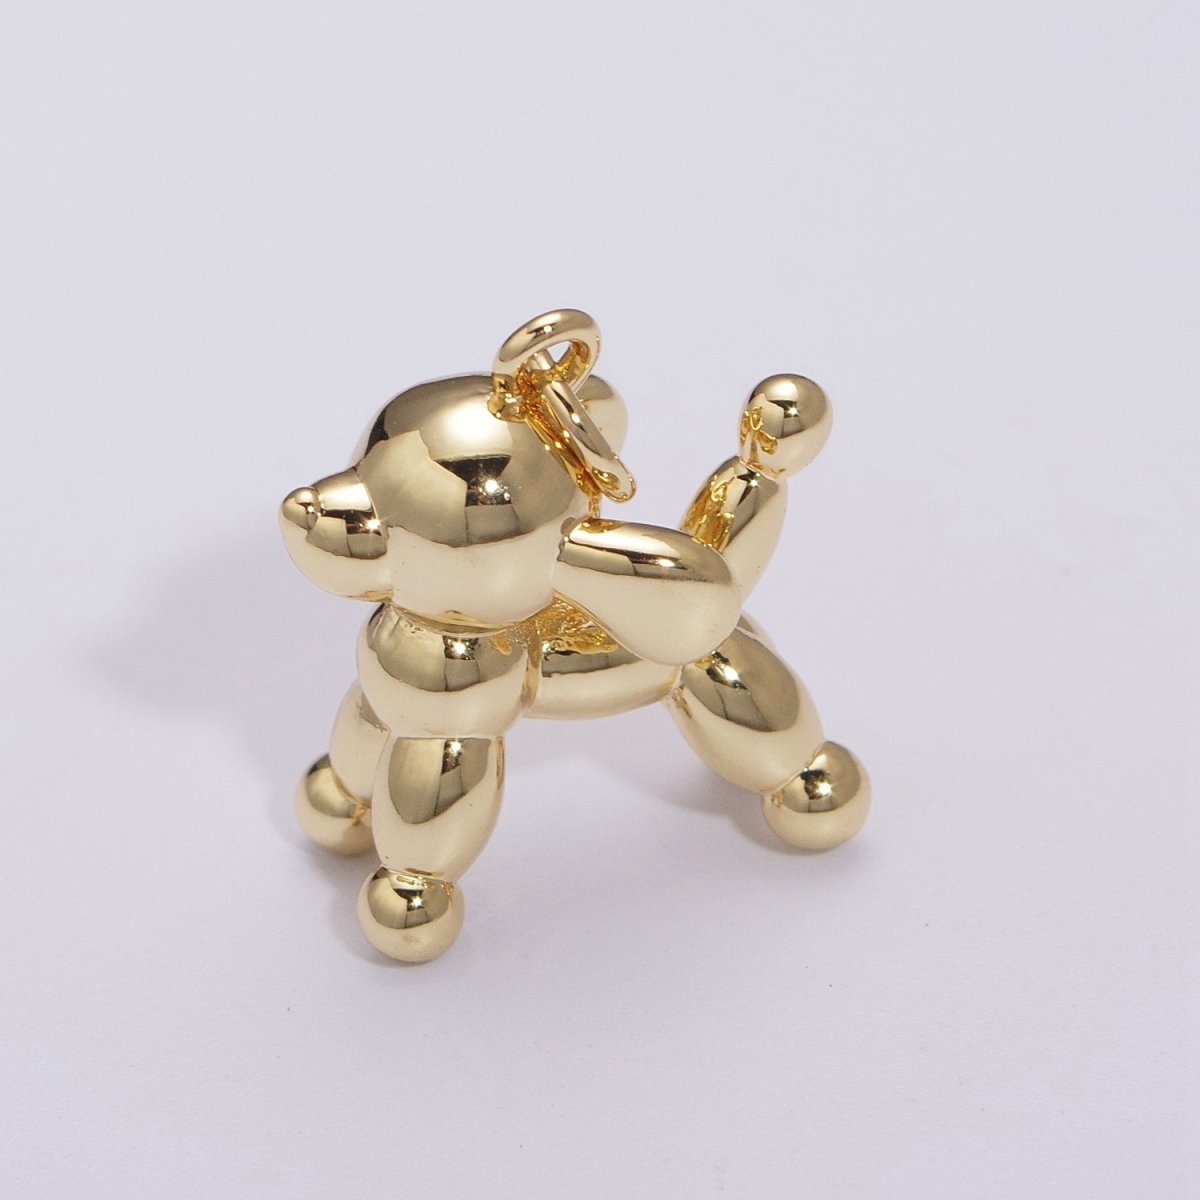 Gold Filled Balloon Dog Charm, 3D Balloon Dog, Animal Balloon Charm, Balloon Animal, Gift for Dog Lover, Funny Charm for Kids, Party Dog M-898 M-899 - DLUXCA